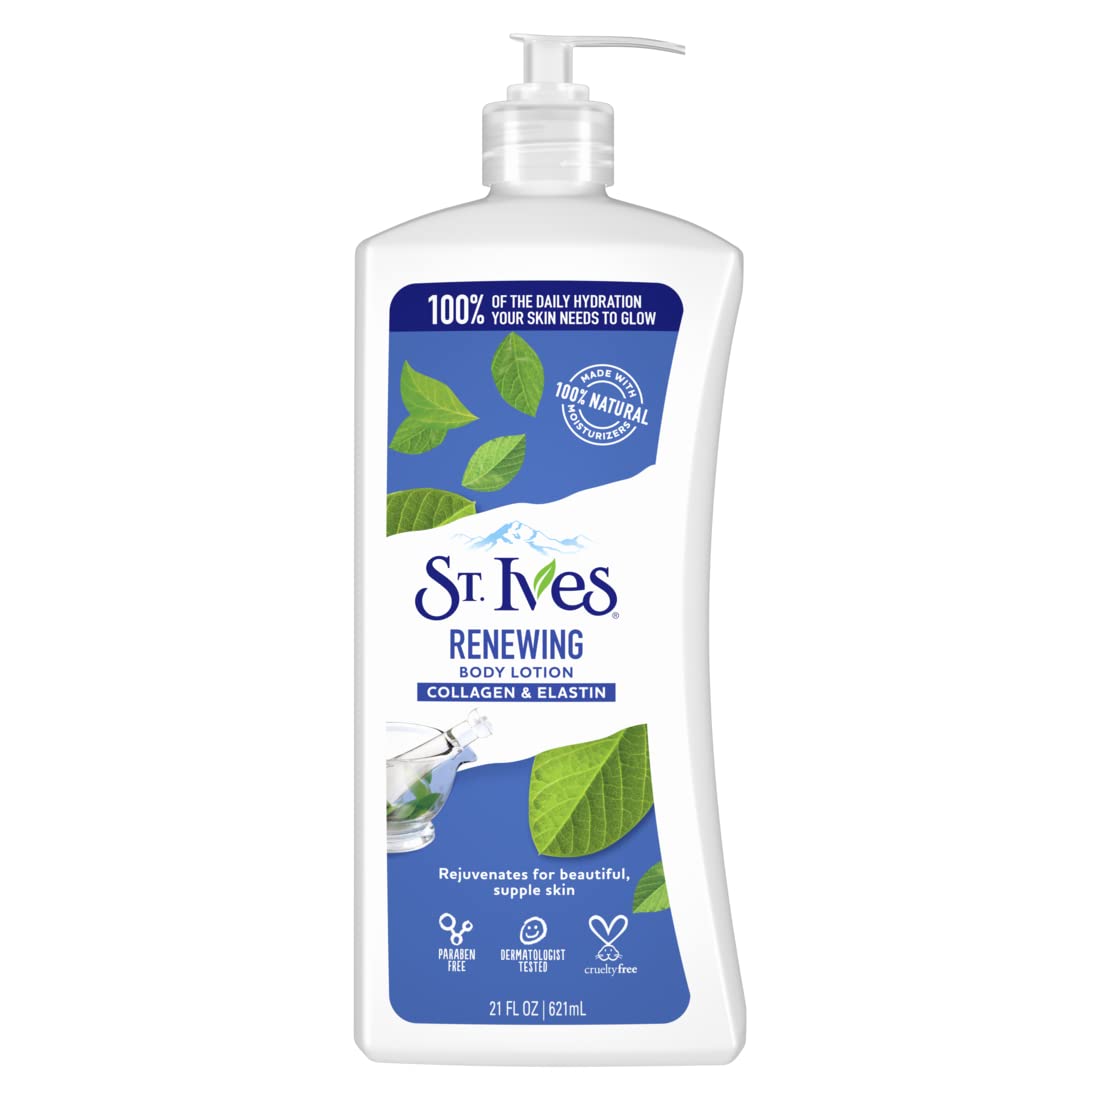 St. Ives Renewing Hand & Body Lotion Moisturizer for Dry Skin Collagen Elastin Made with 100% Natural Moisturizers, 21 oz 4 Pack